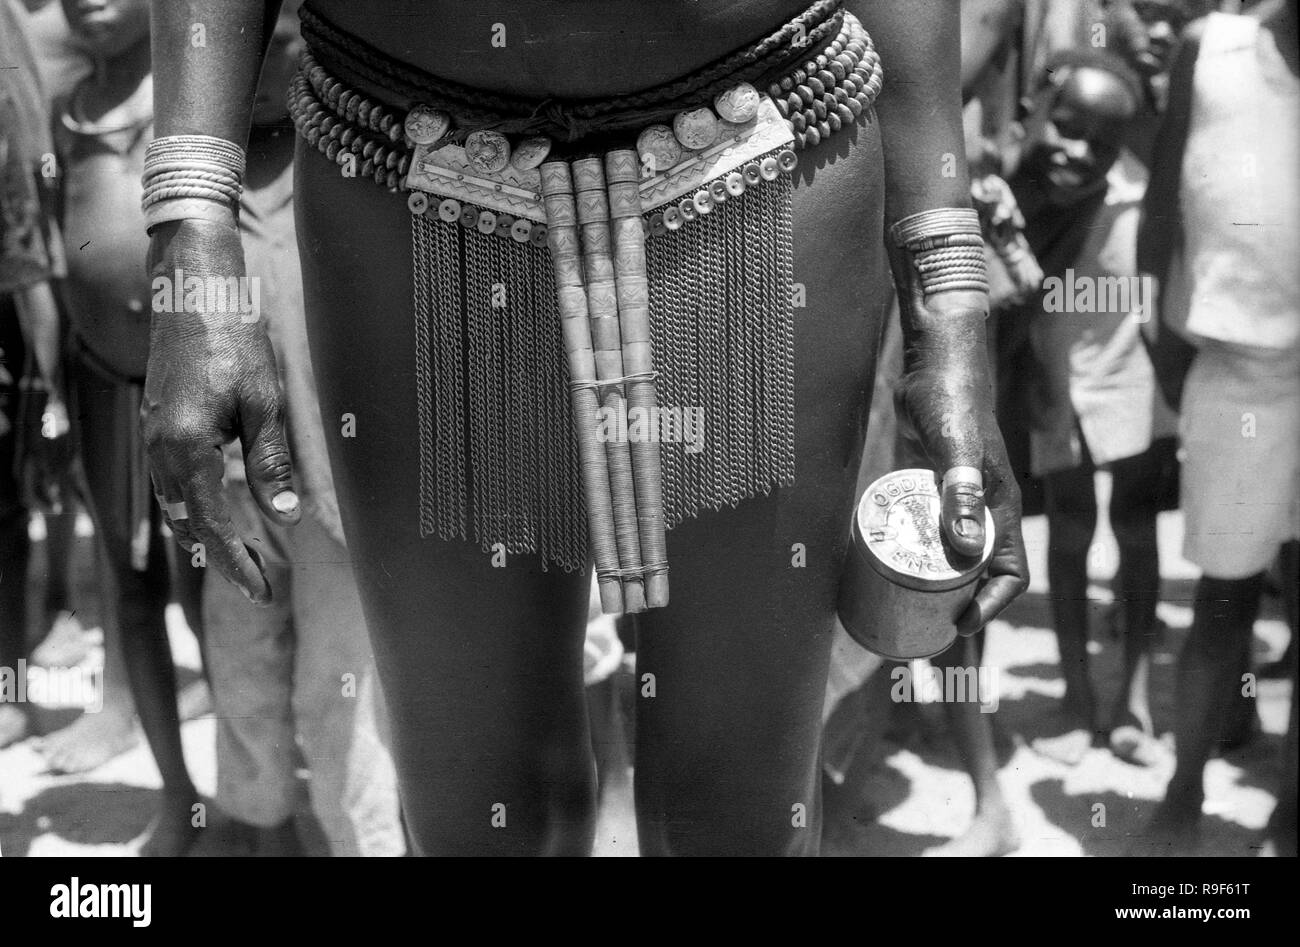 1950's Native woman wearing traditional tribal body decorations while trading and carrying Ogdens tobacco tin at street market West Africa Stock Photo